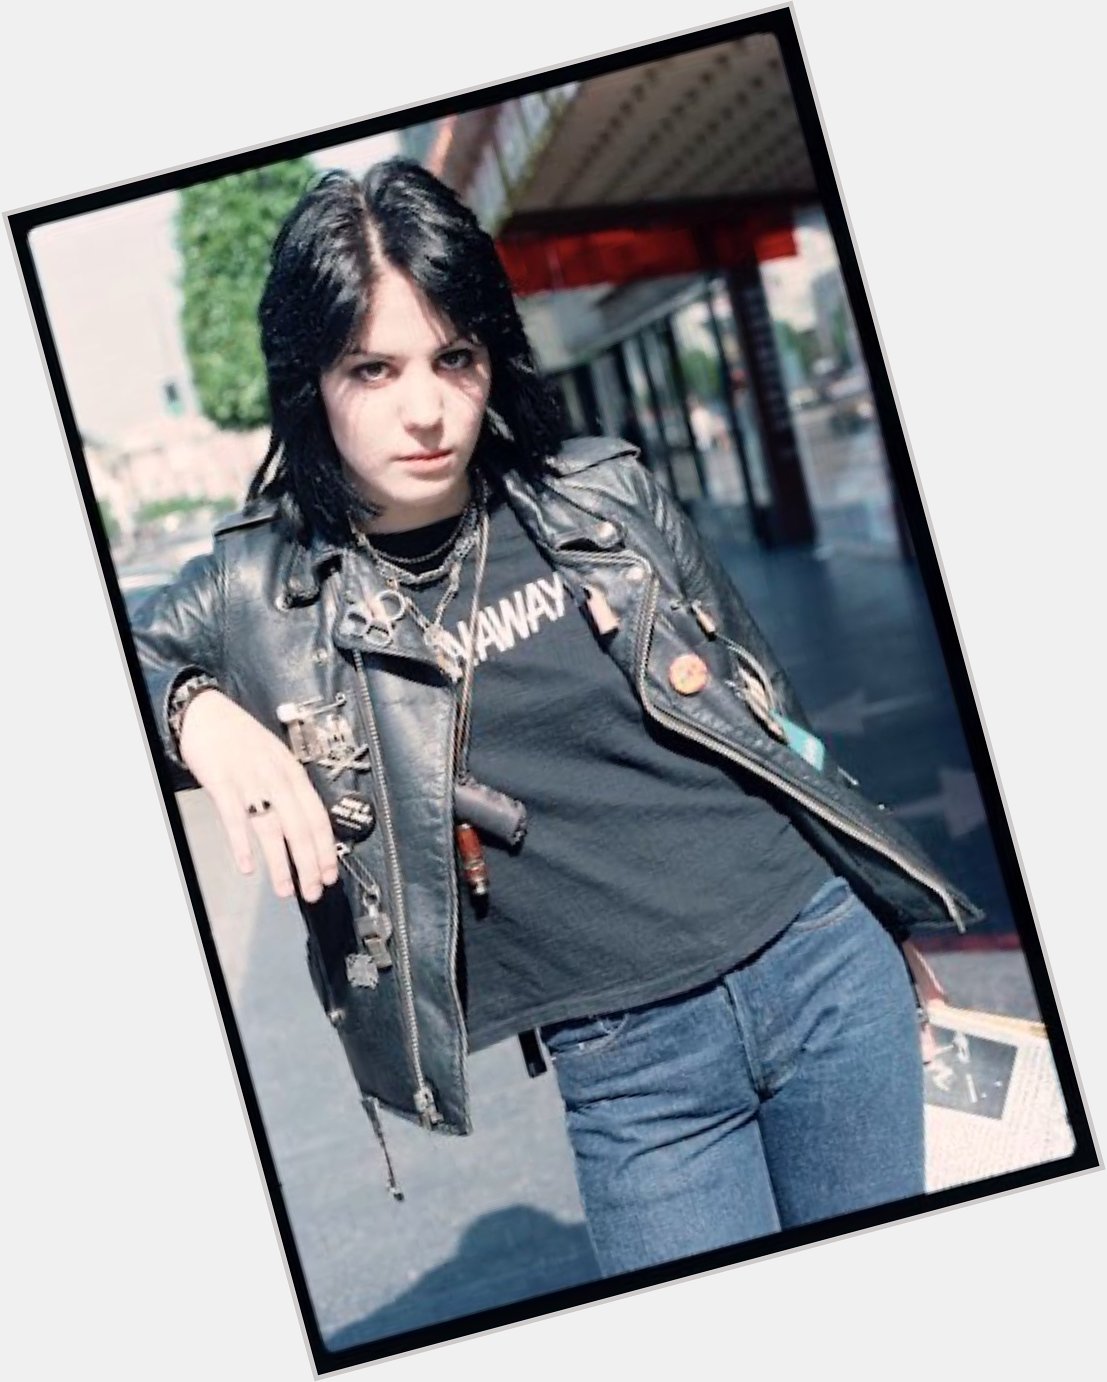 Happy 64th birthday to the one and only Joan Jett! 